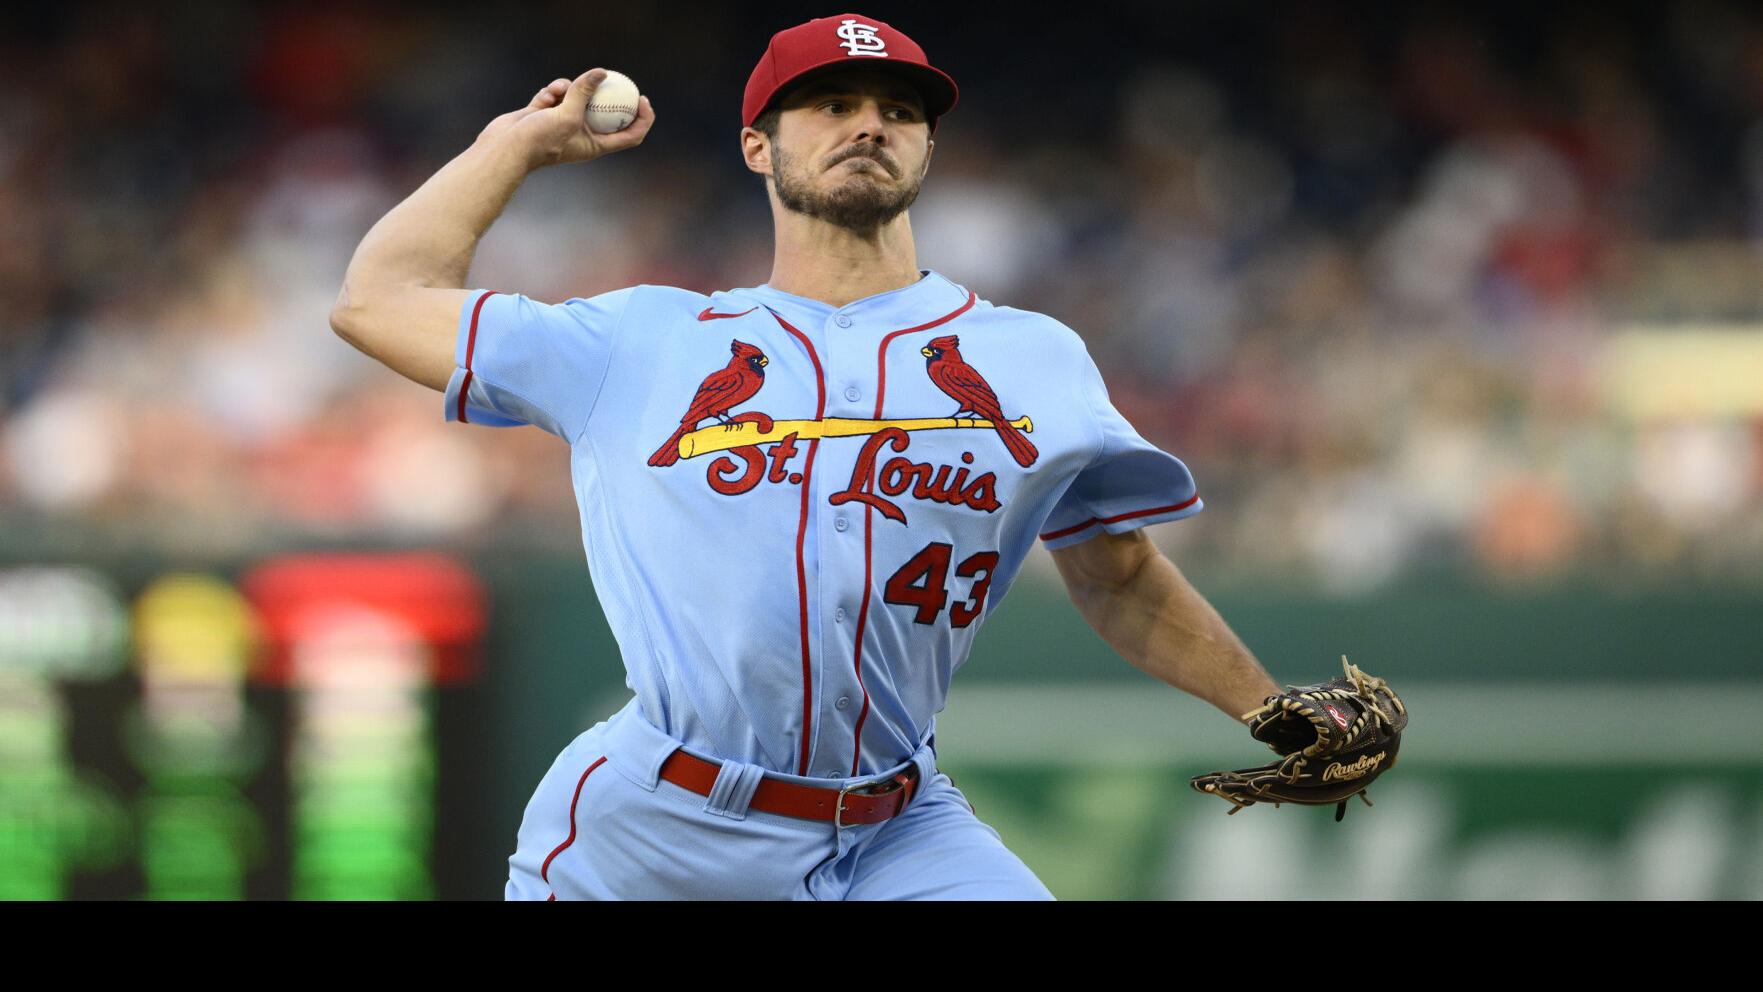 Hudson's search for a grip on consistency illustrates Cardinals pitching bind at deadline